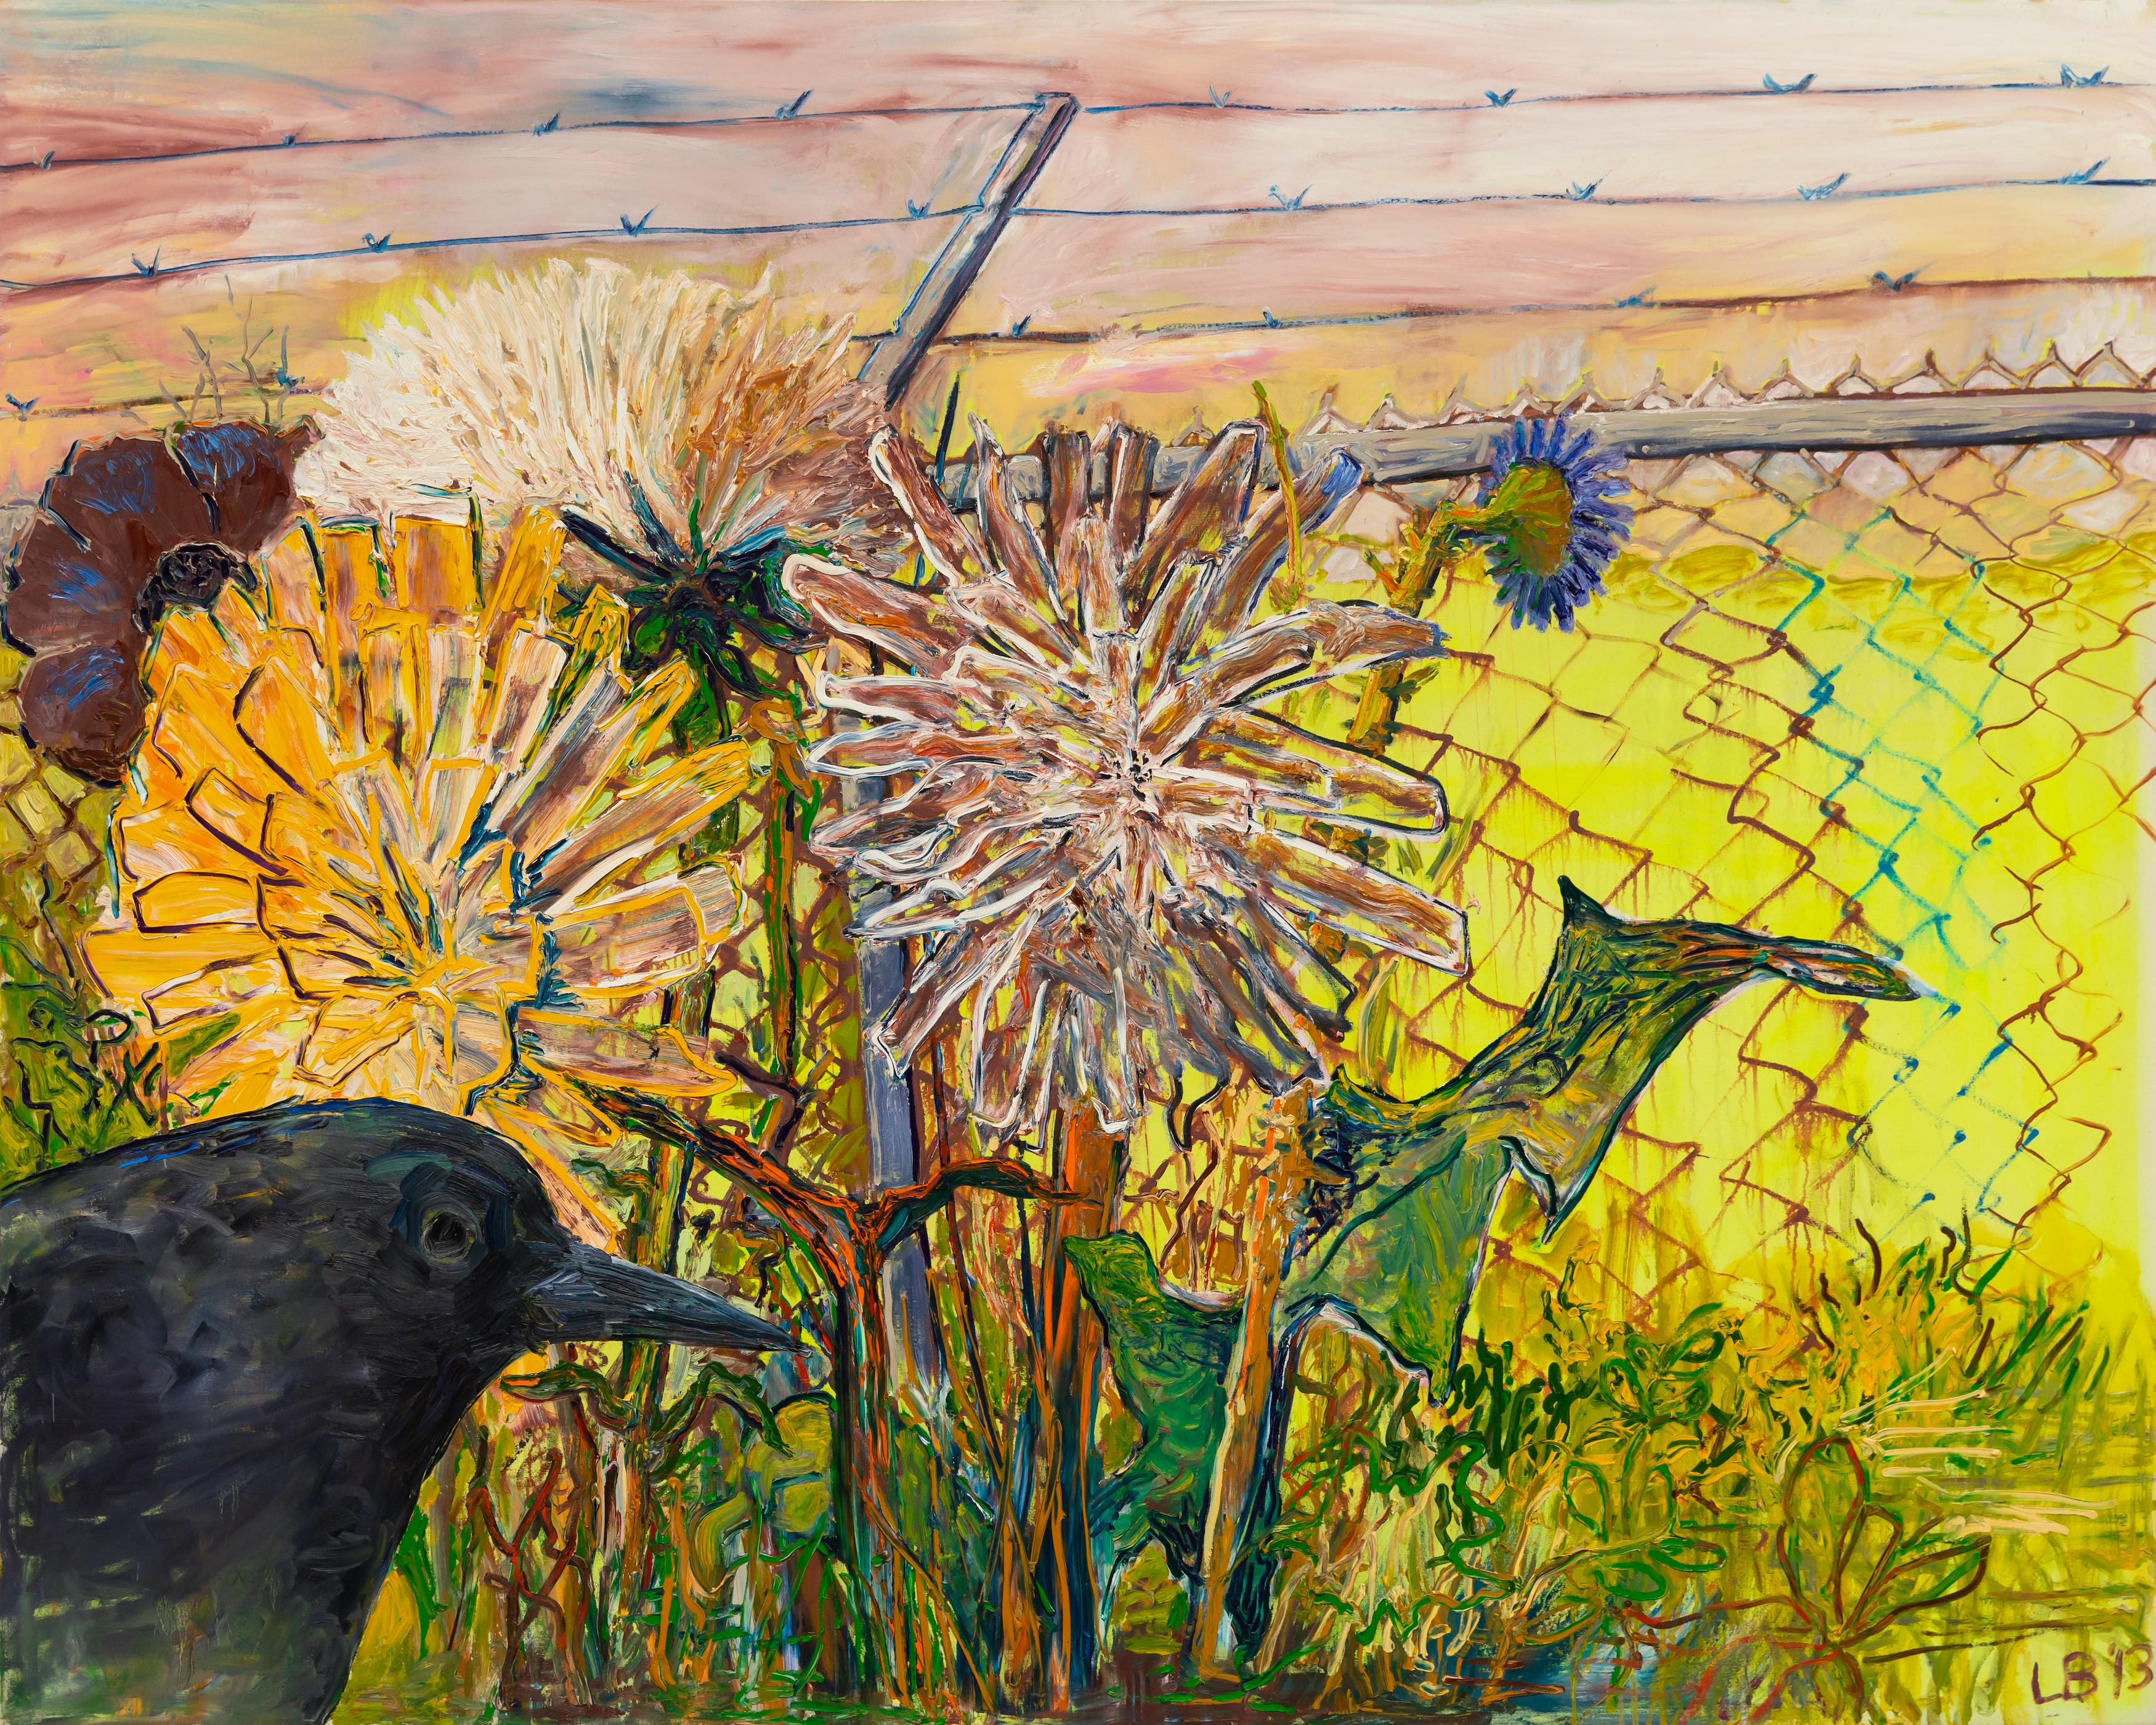 Blackbird and Fence, Oil on Canvas, 2013